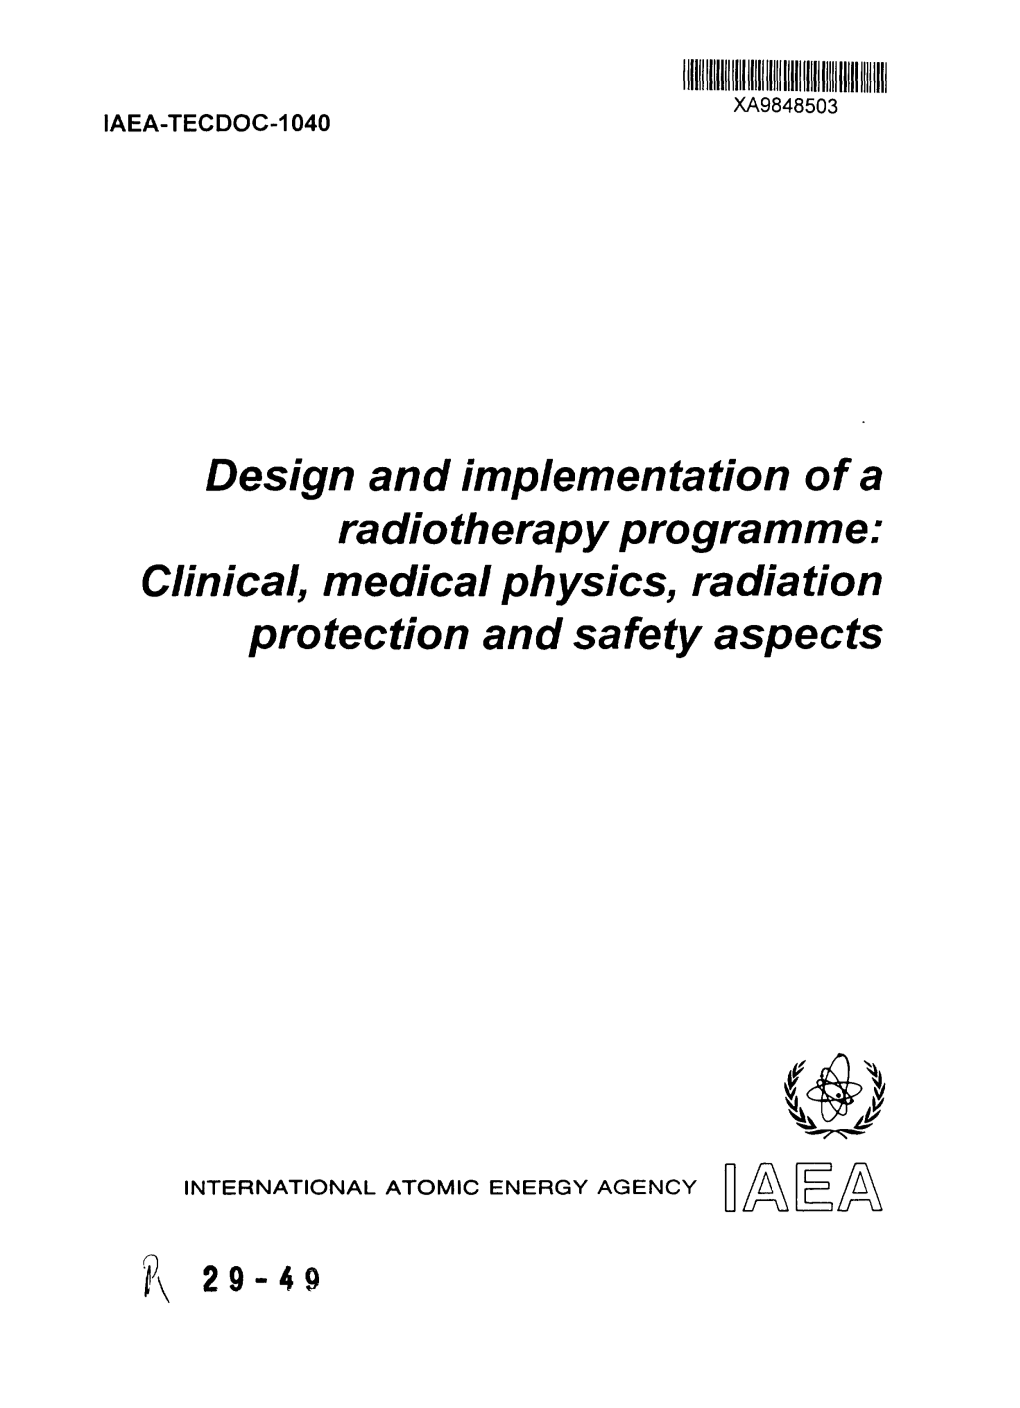 Clinical, Medical Physics, Radiation Protection and Safety Aspects